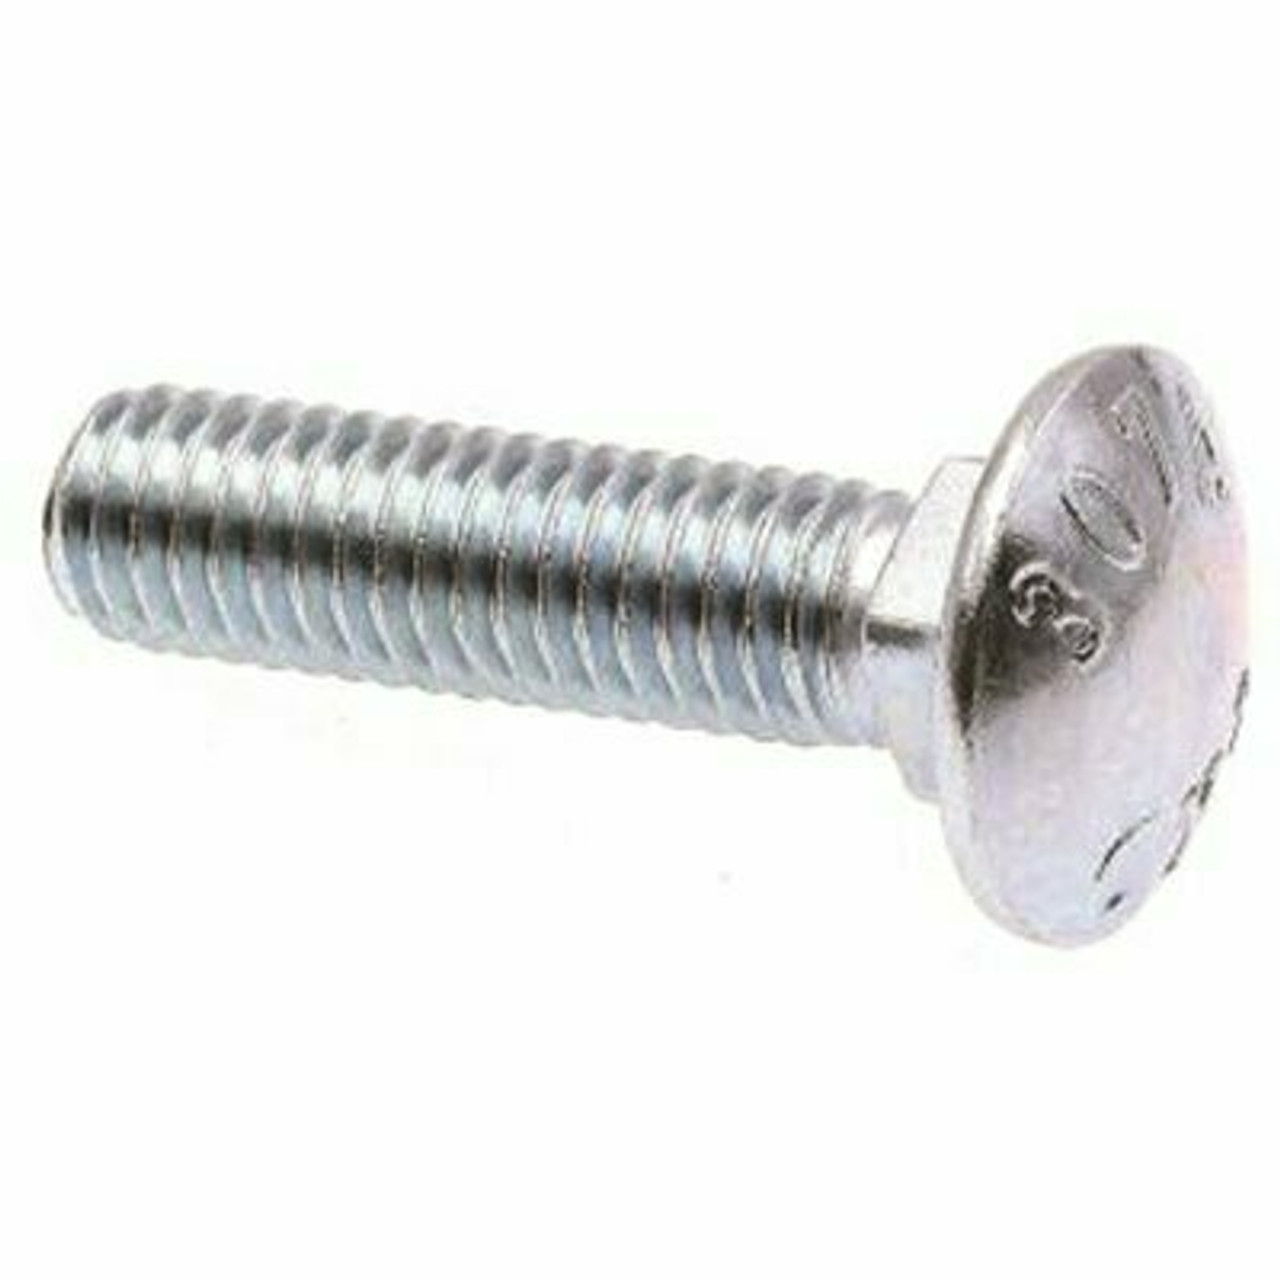 1/2 In.-13 X 2-1/2 In. Zinc Plated Carriage Bolts (25 Per Pack)